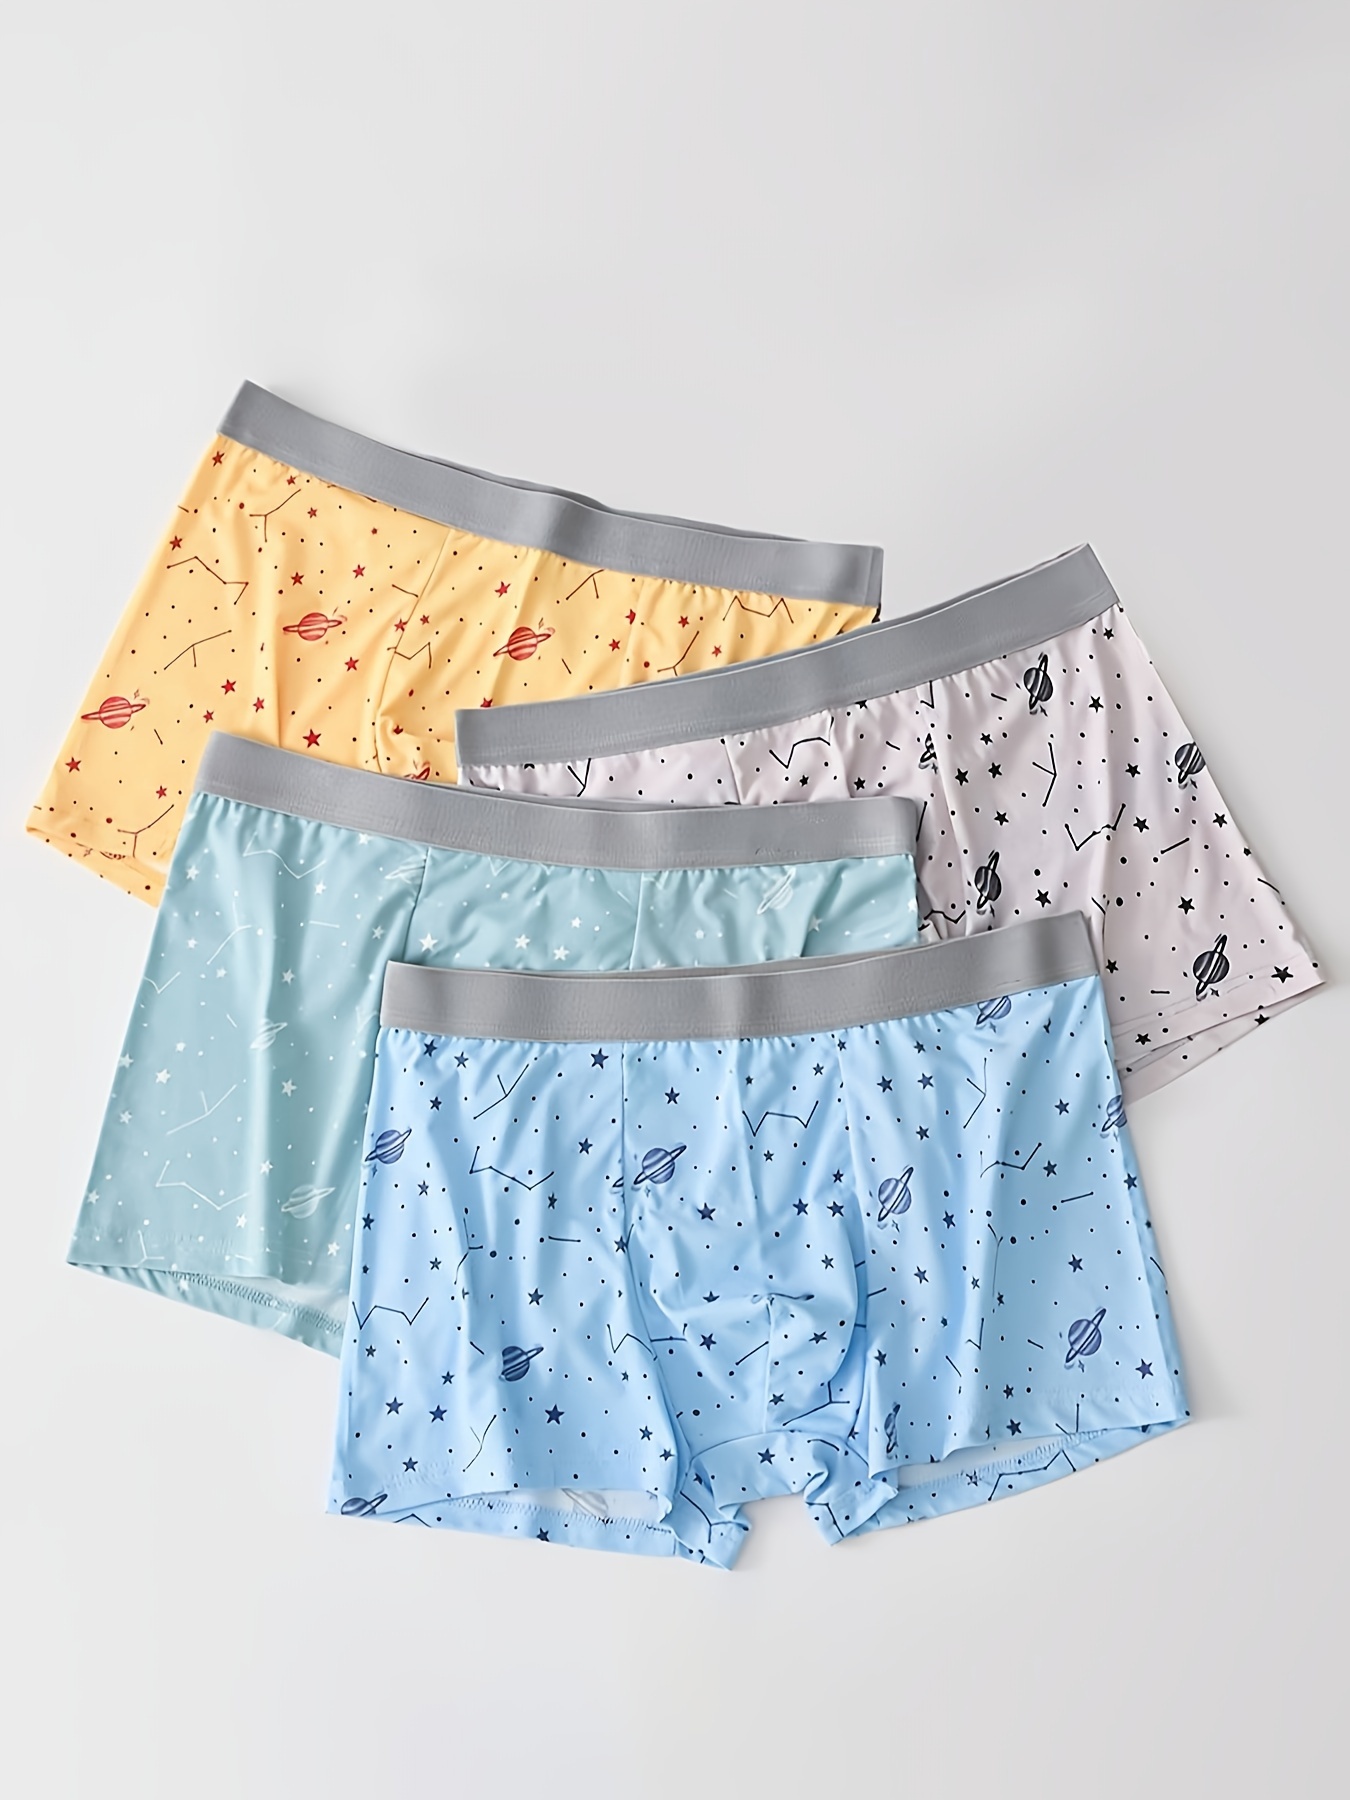 Stylish, Chic and Comfortable Women's Boxer Shorts